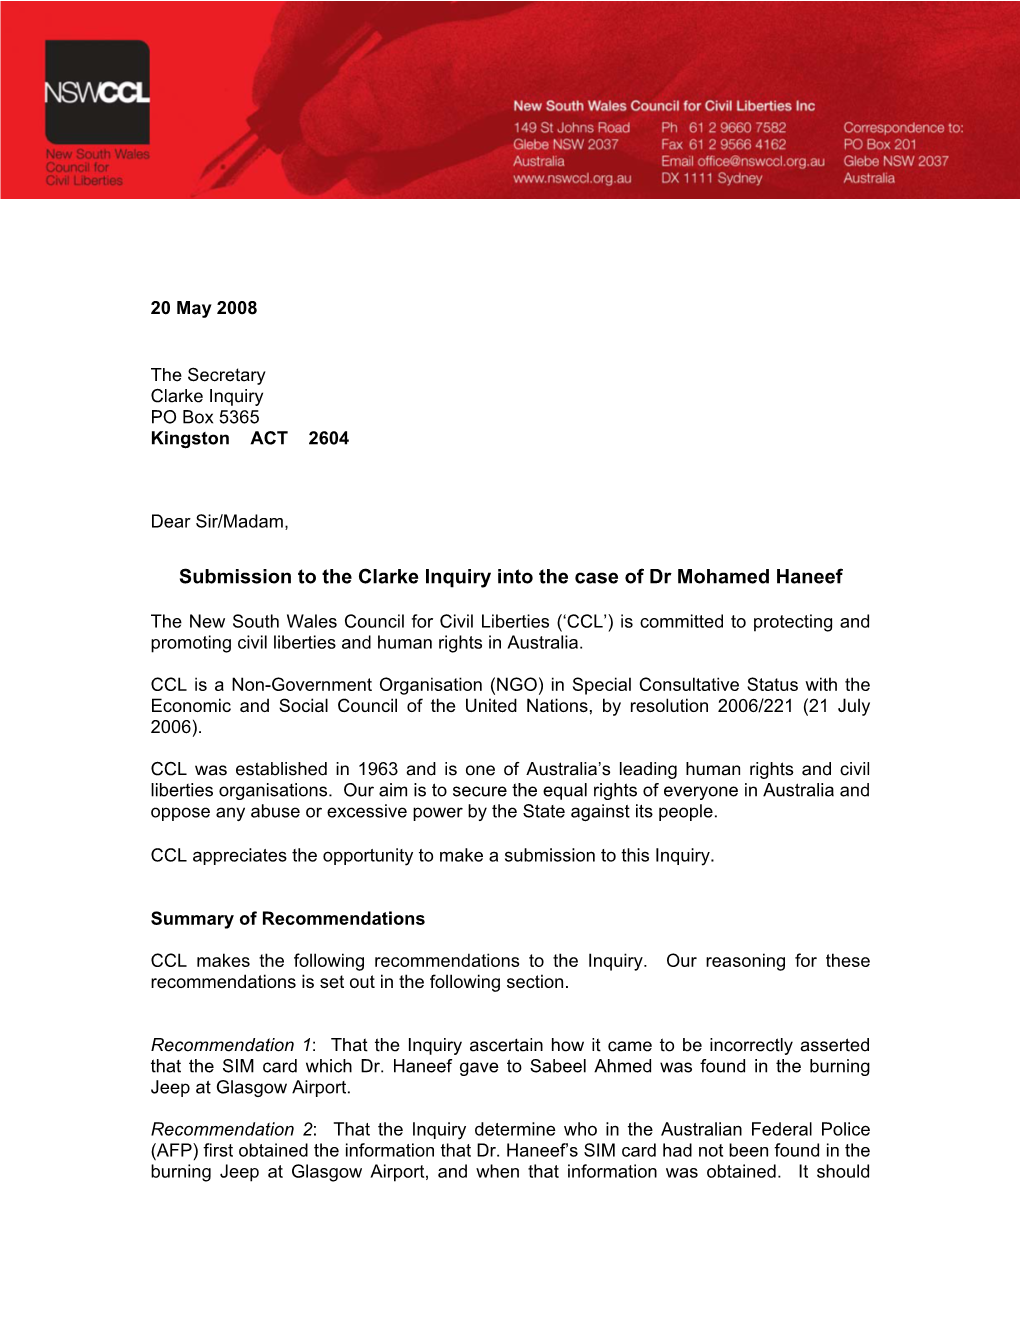 Submission to the Clarke Inquiry Into the Case of Dr Mohamed Haneef